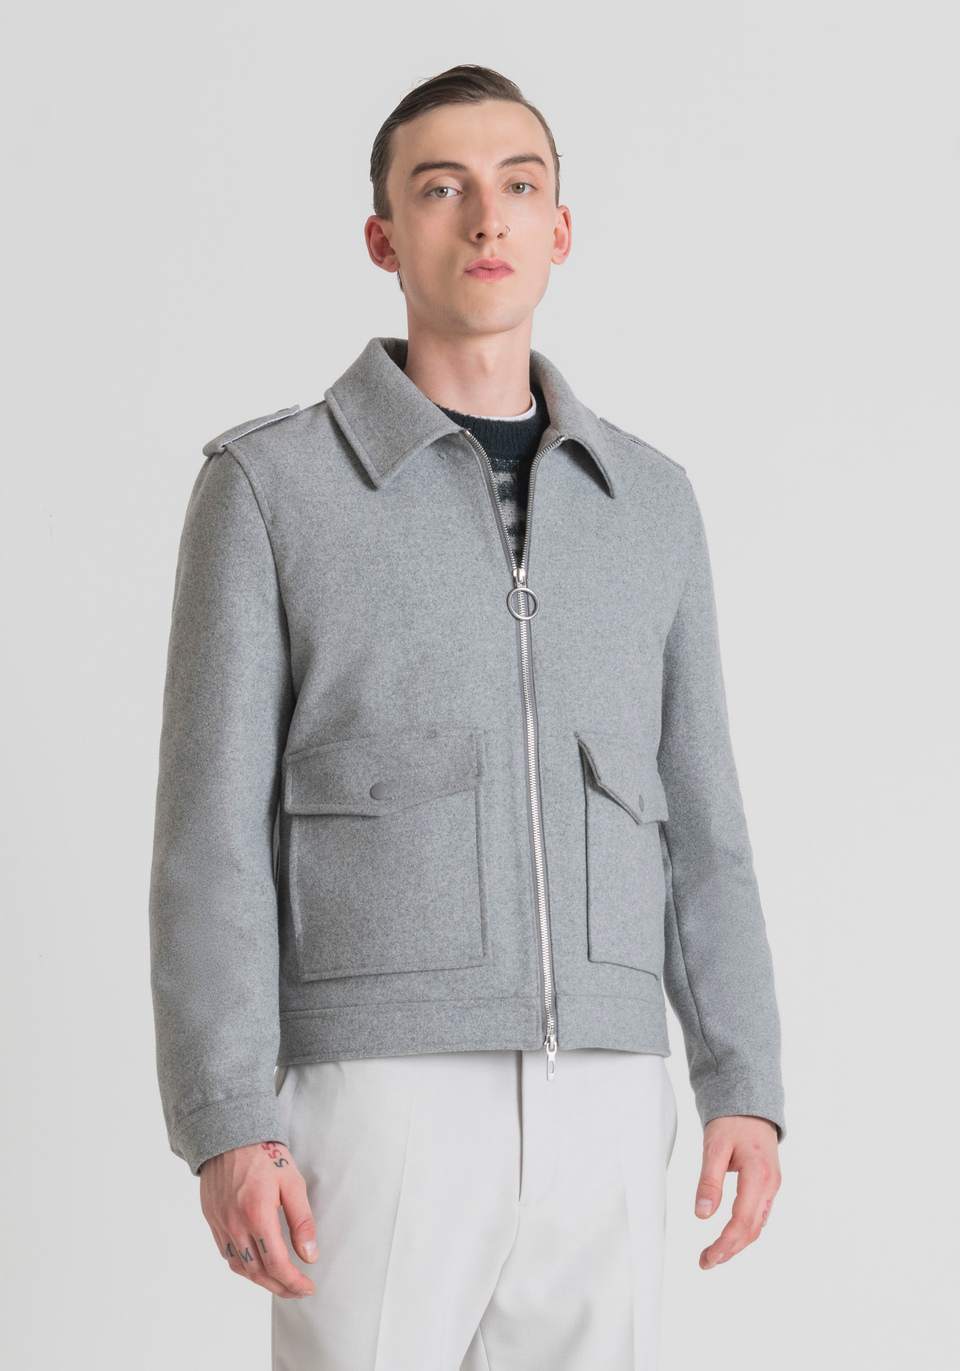 REGULAR FIT JACKET IN WOOL AND CASHMERE BLEND WITH SHIRT COLLAR - Antony Morato Online Shop